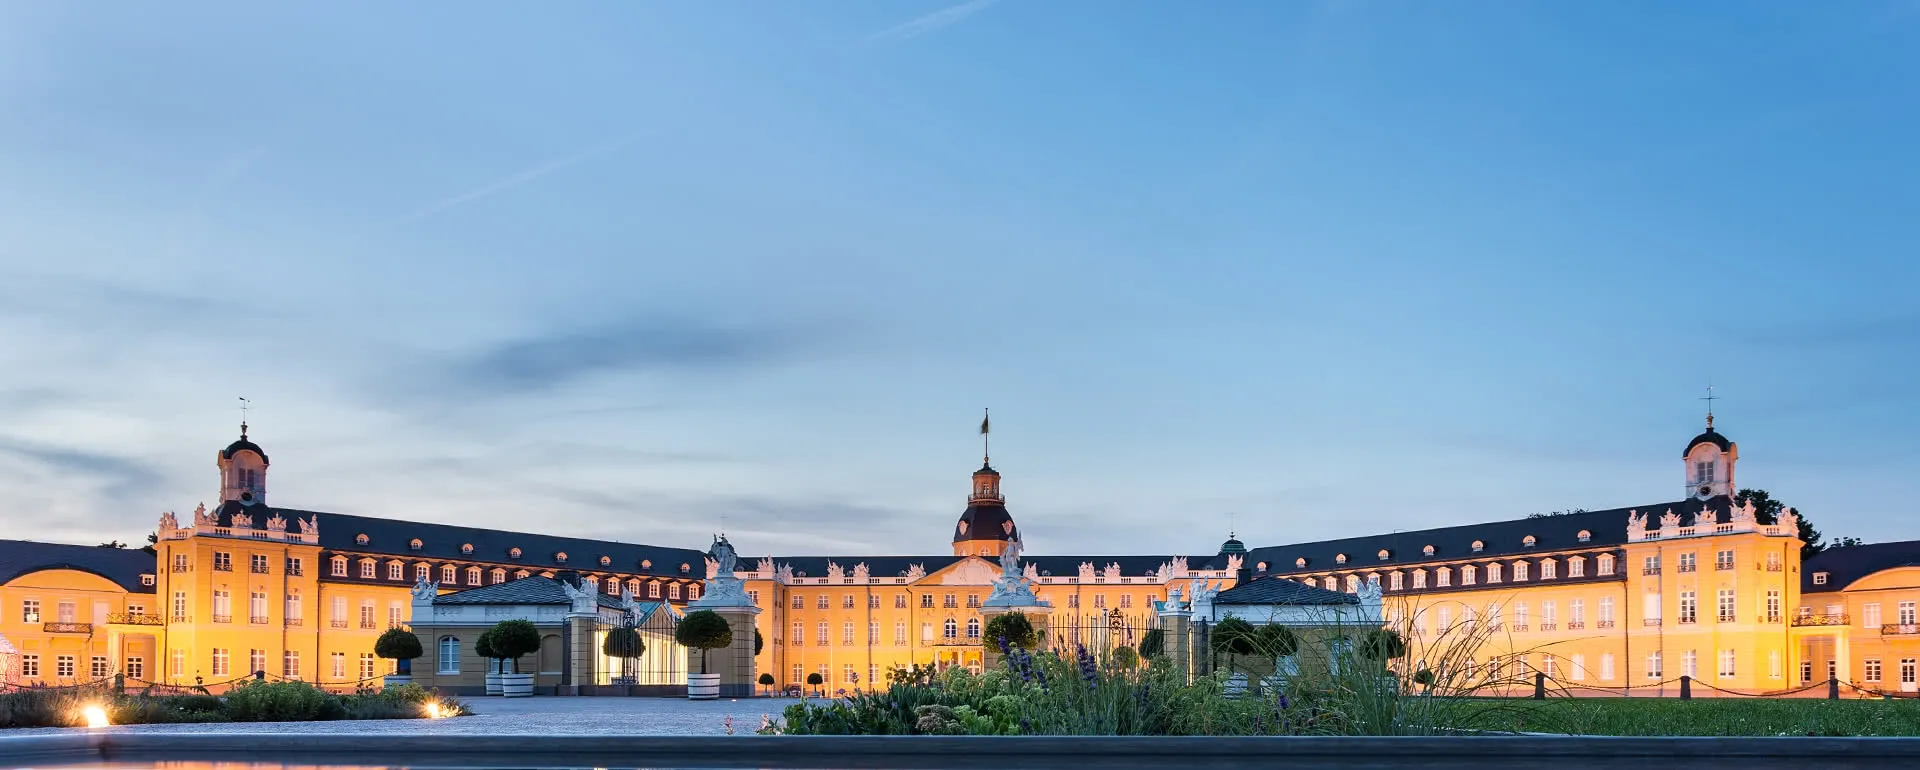 Meeting and conference location Karlsruhe